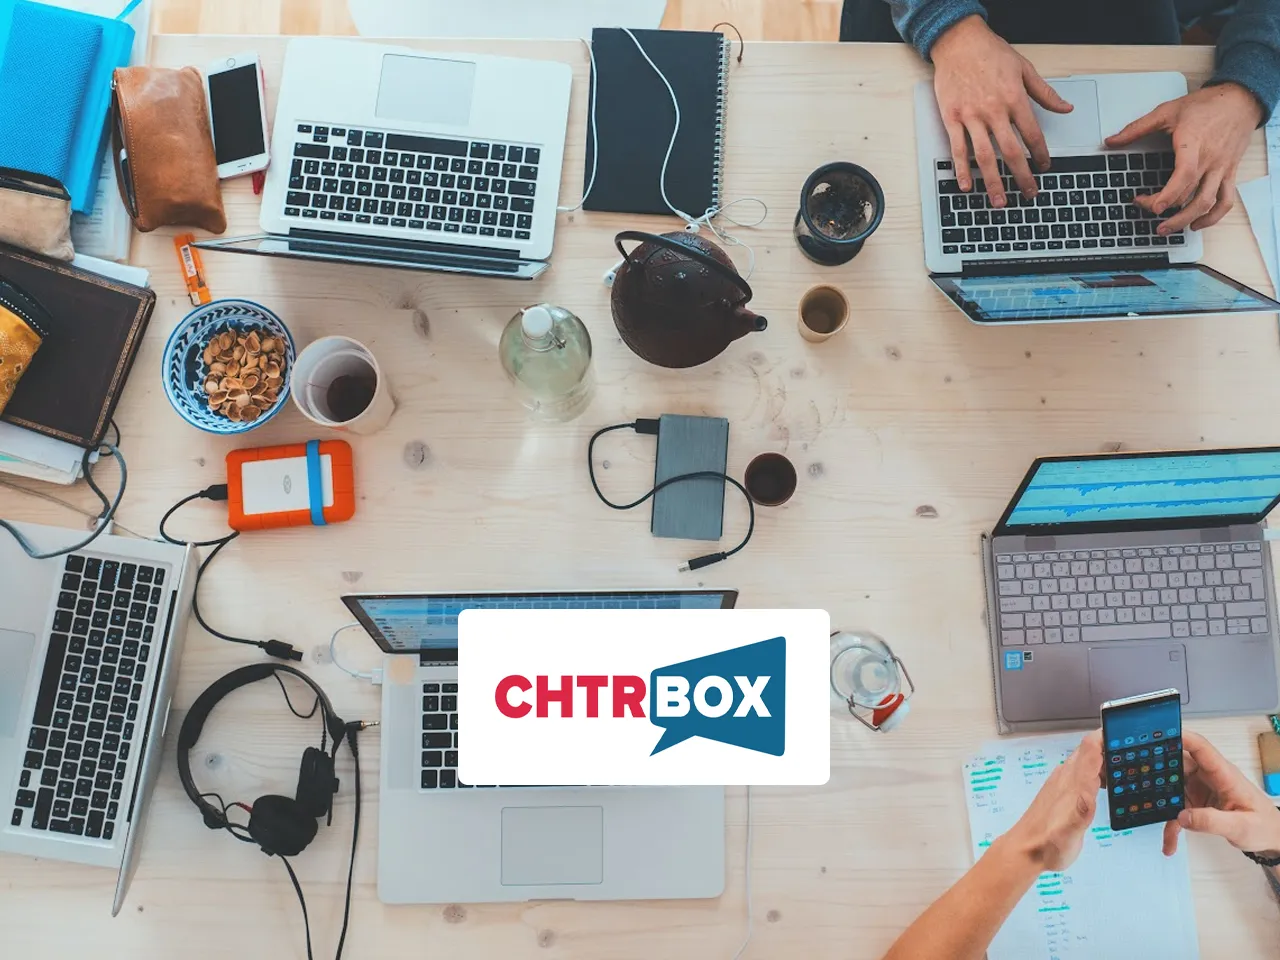 Agency Feature: All you need to know about Chtrbox